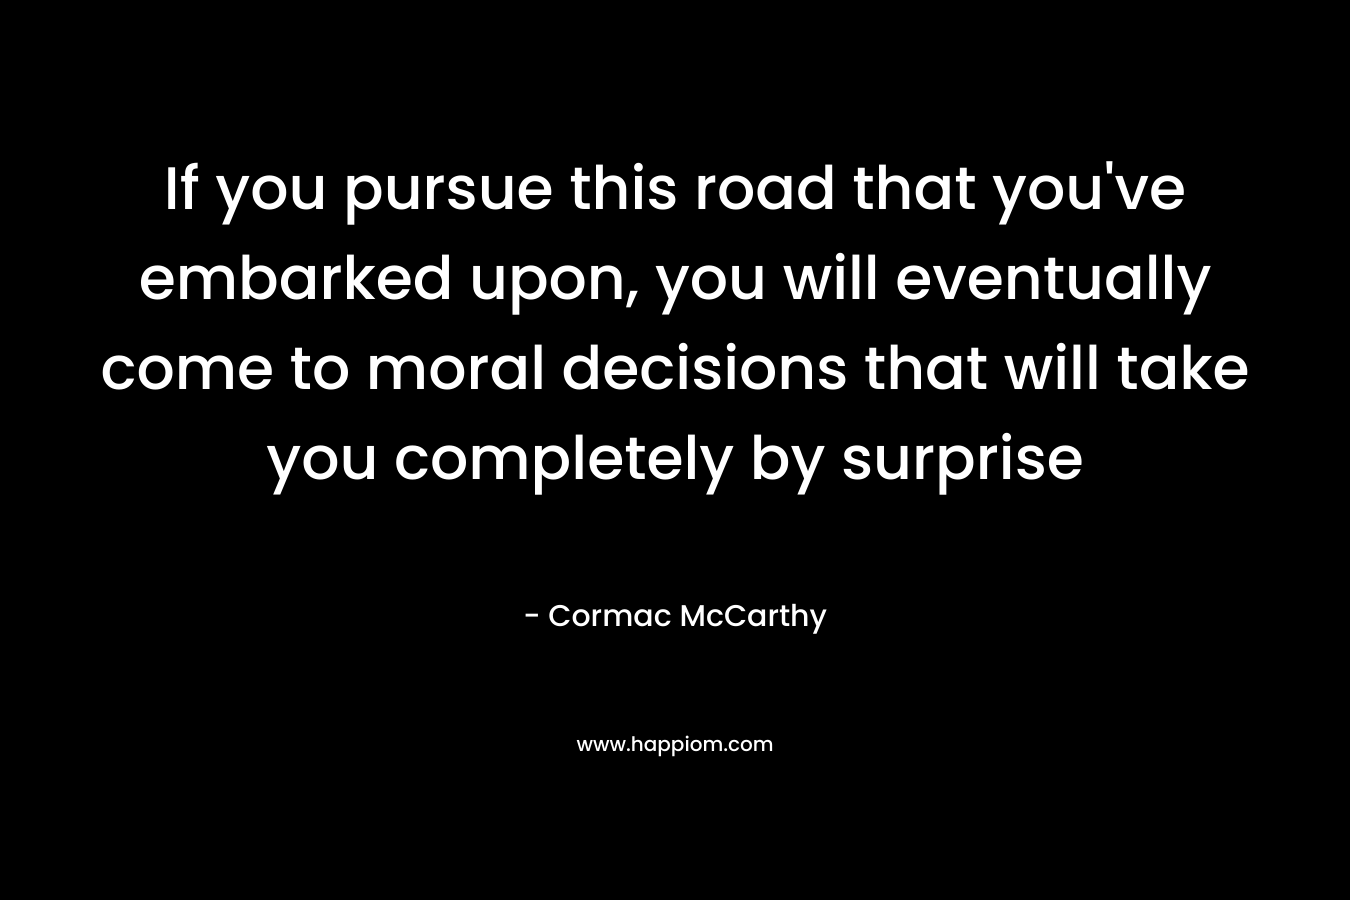 If you pursue this road that you’ve embarked upon, you will eventually come to moral decisions that will take you completely by surprise – Cormac McCarthy